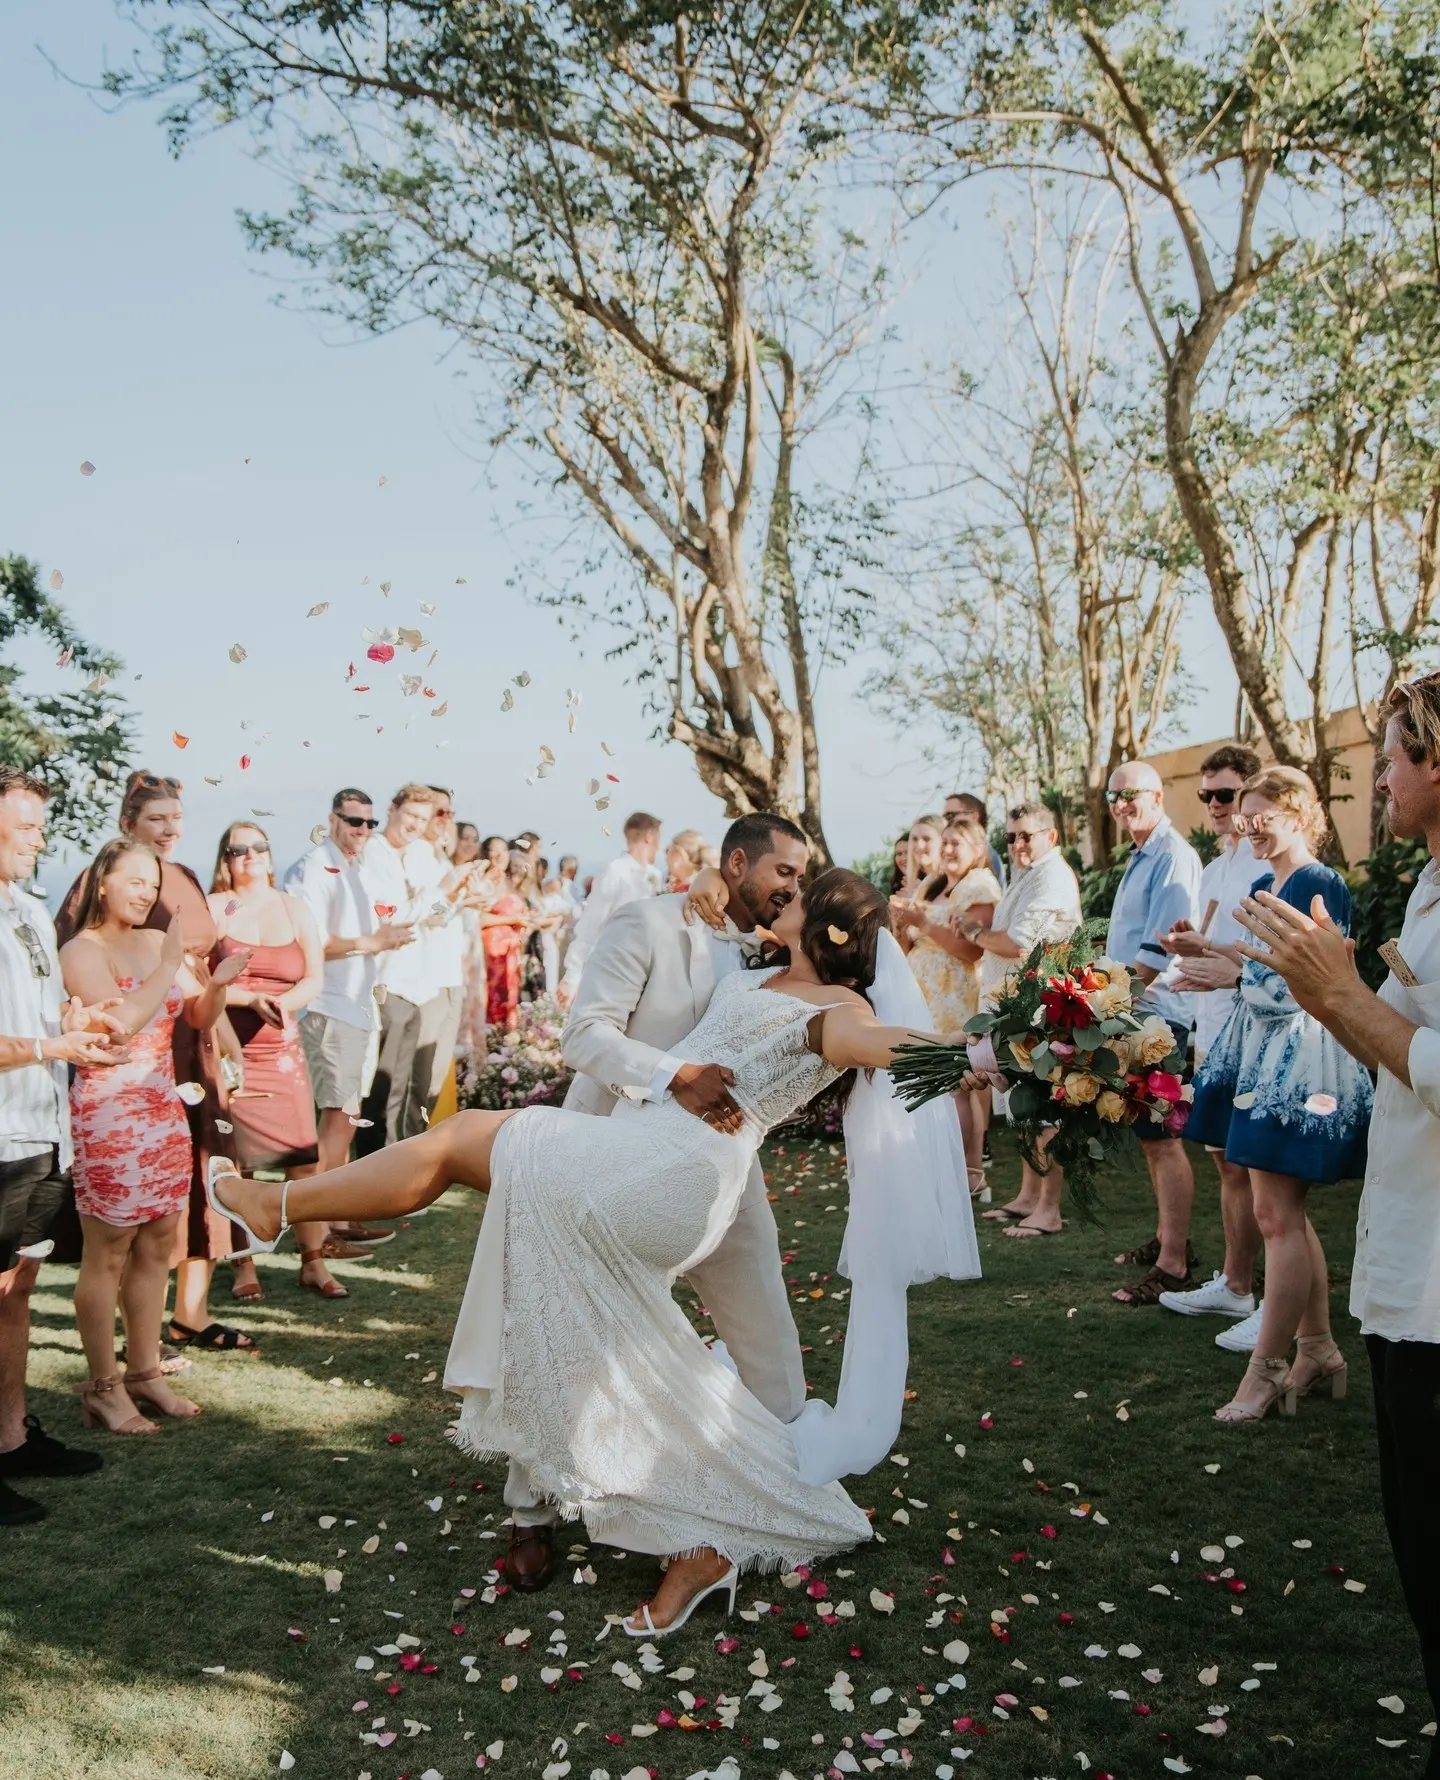 couple celebrates wedding surrounded by family members in Bali